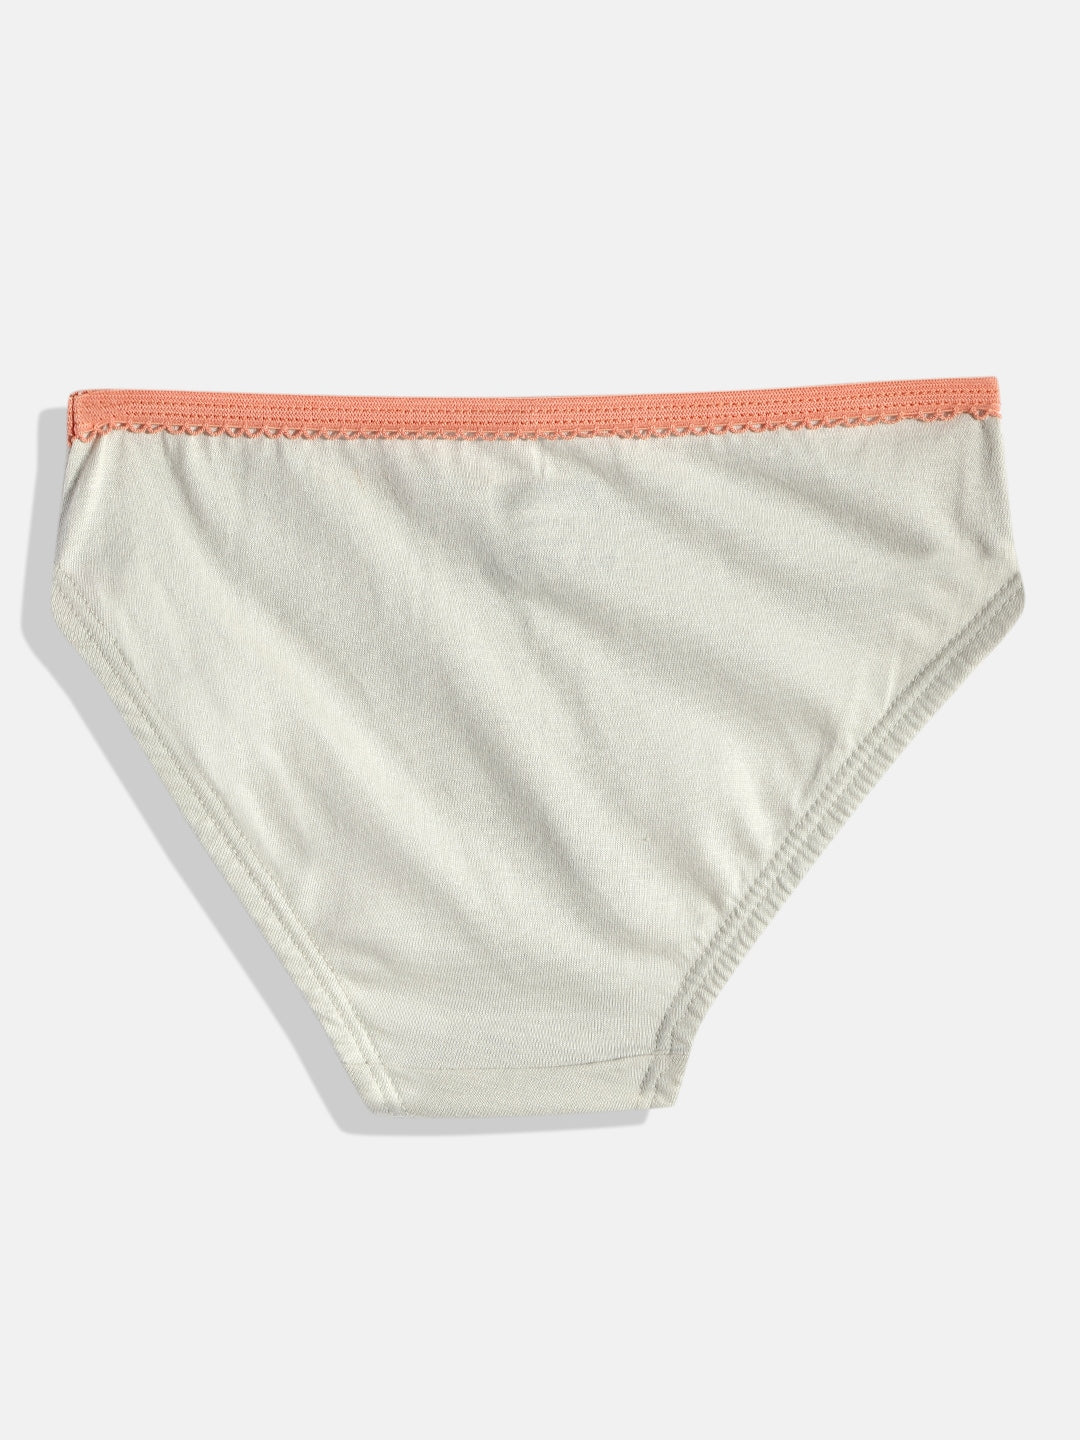 Buy Cat Printed Kid's Brief for Girls white.